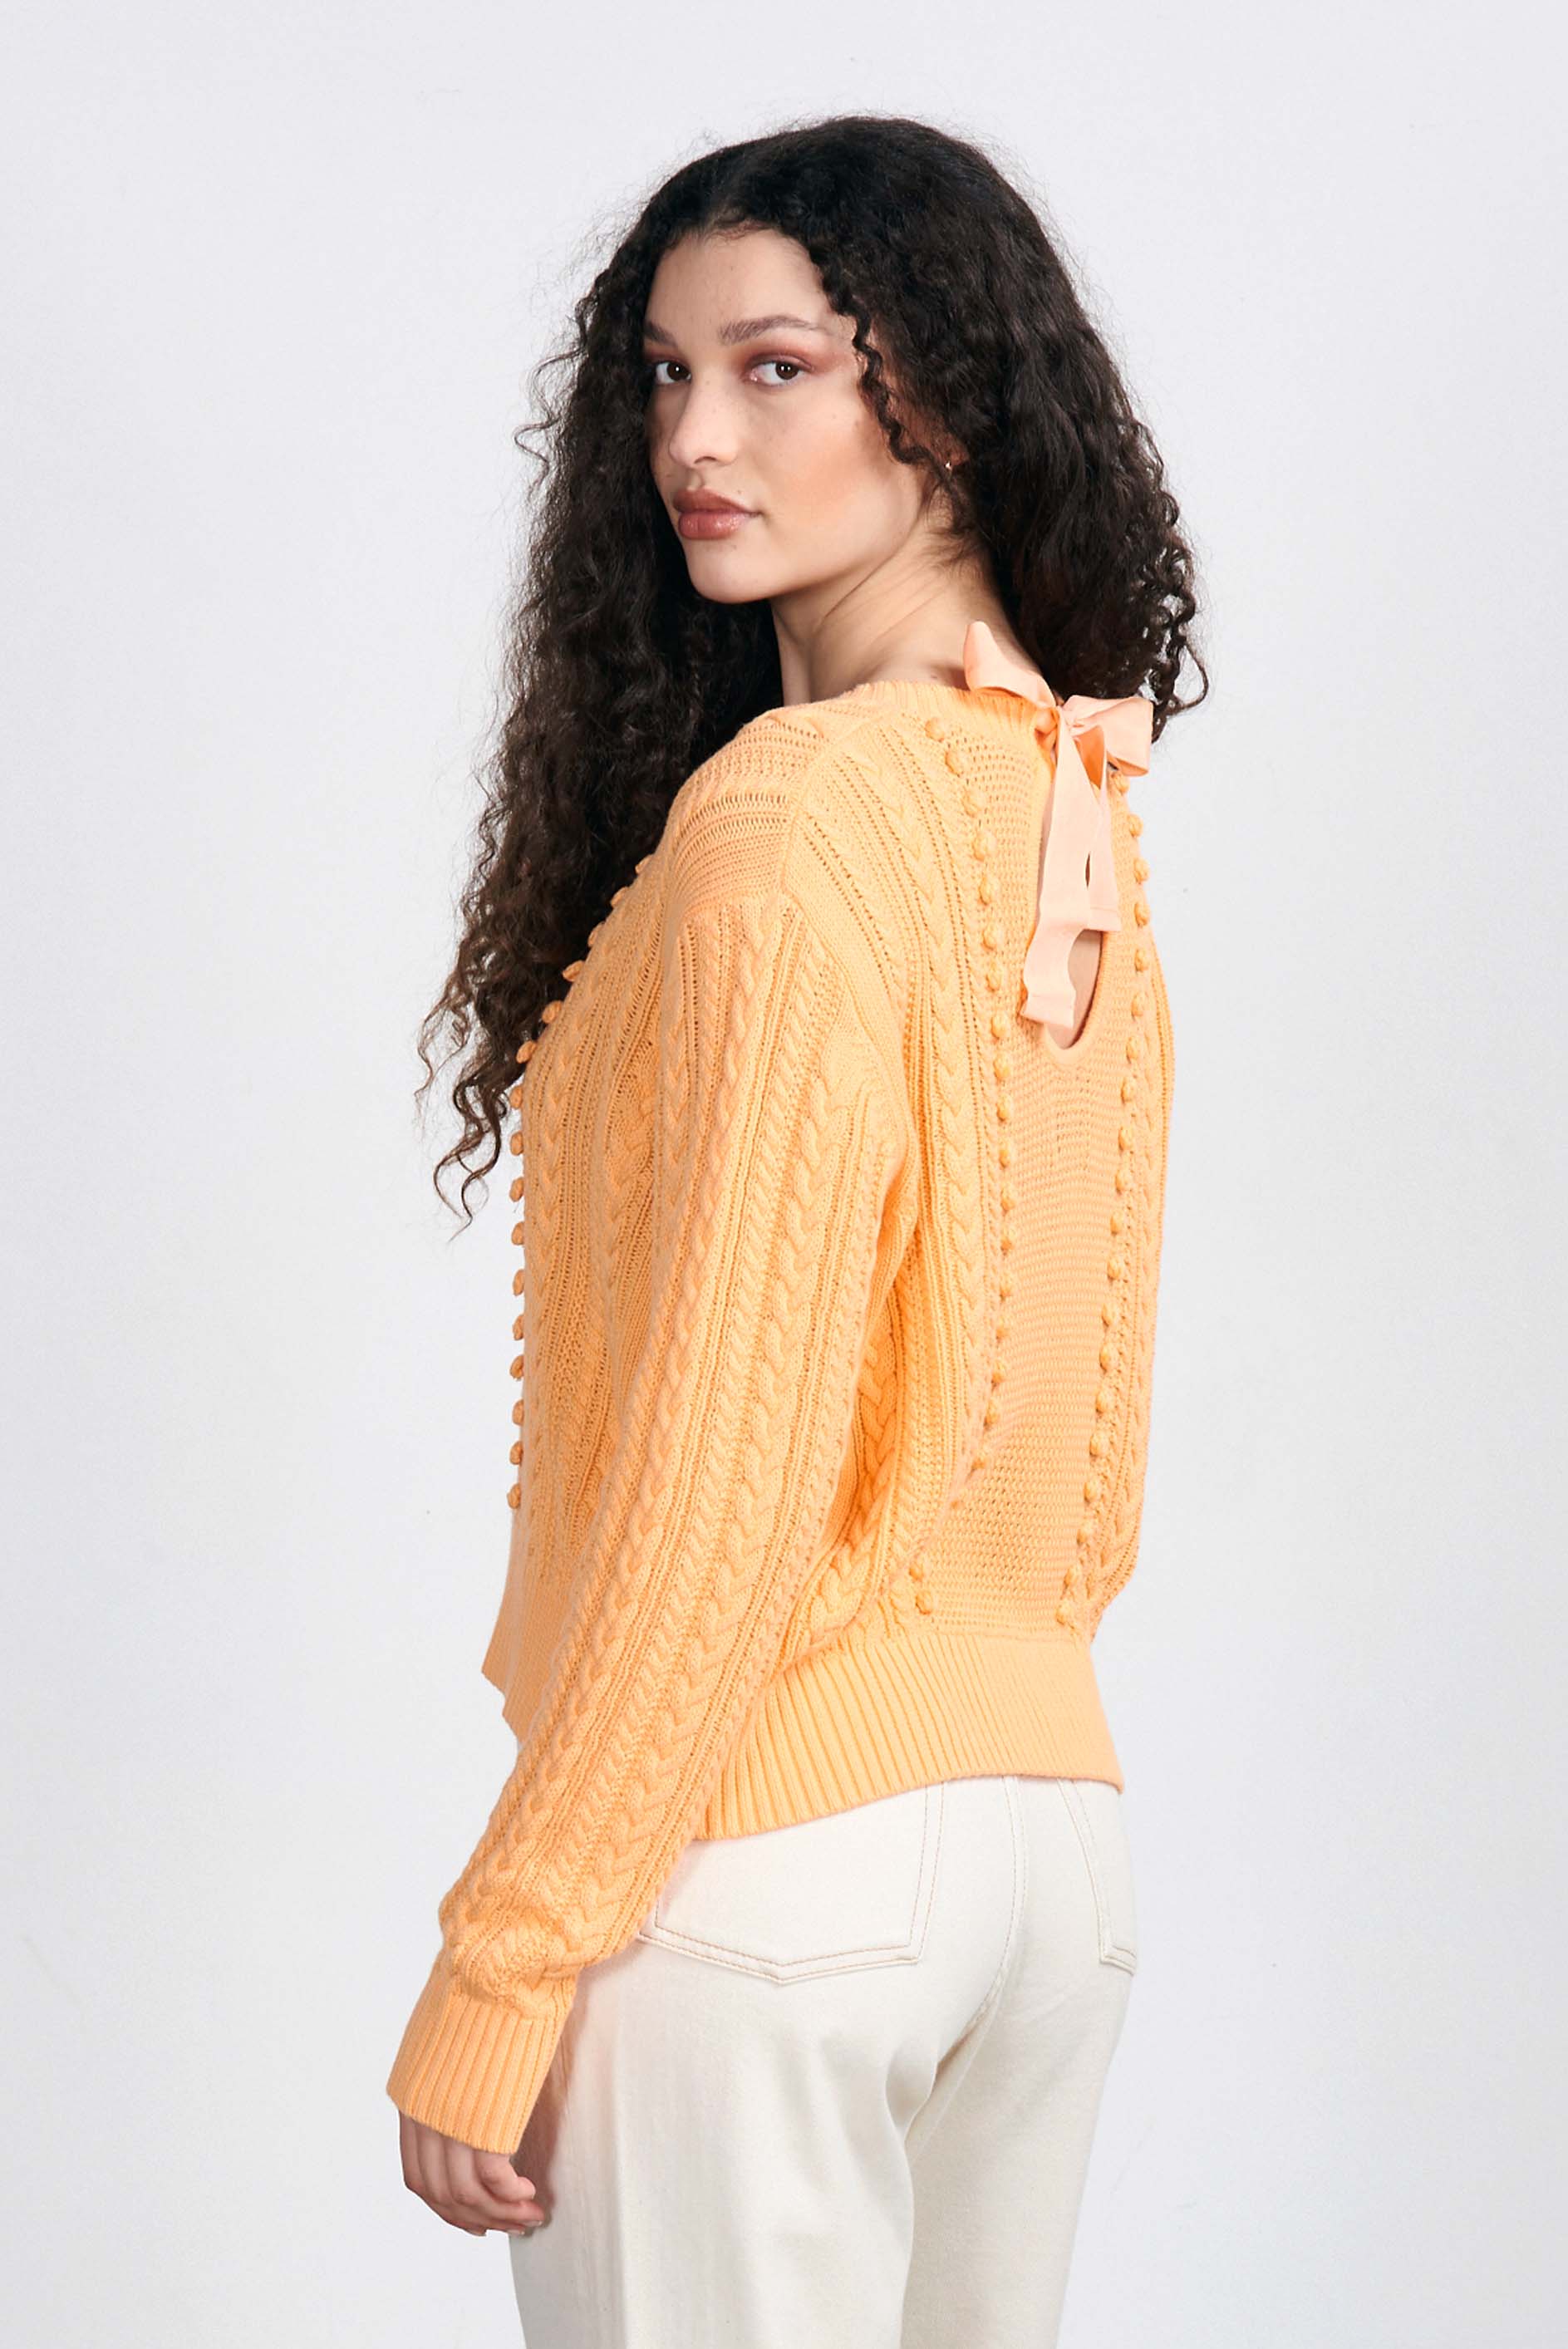 Brown haired female model wearing Jumper1234 Apricot cotton aran crew neck jumper with a ribbon tie back facing away from the camera